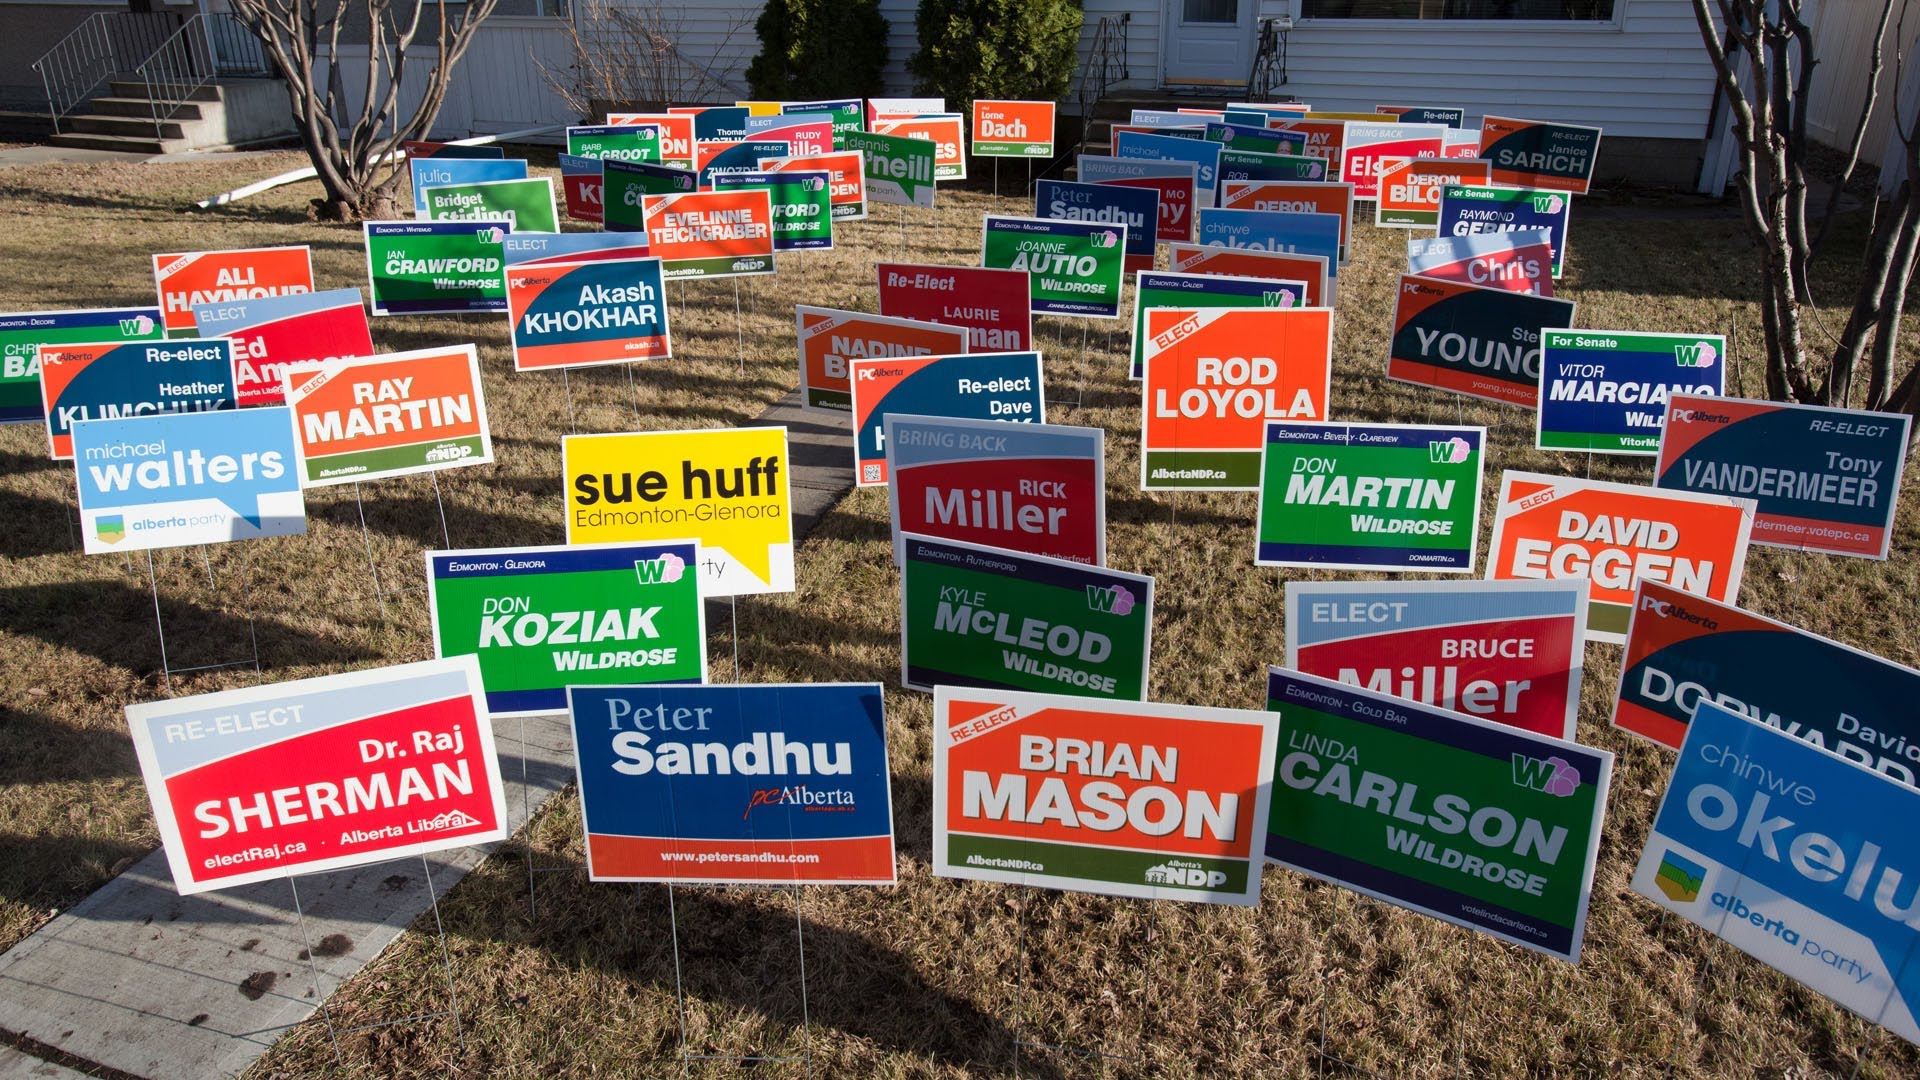 blog-lawn-signs-and-bumper-stickers